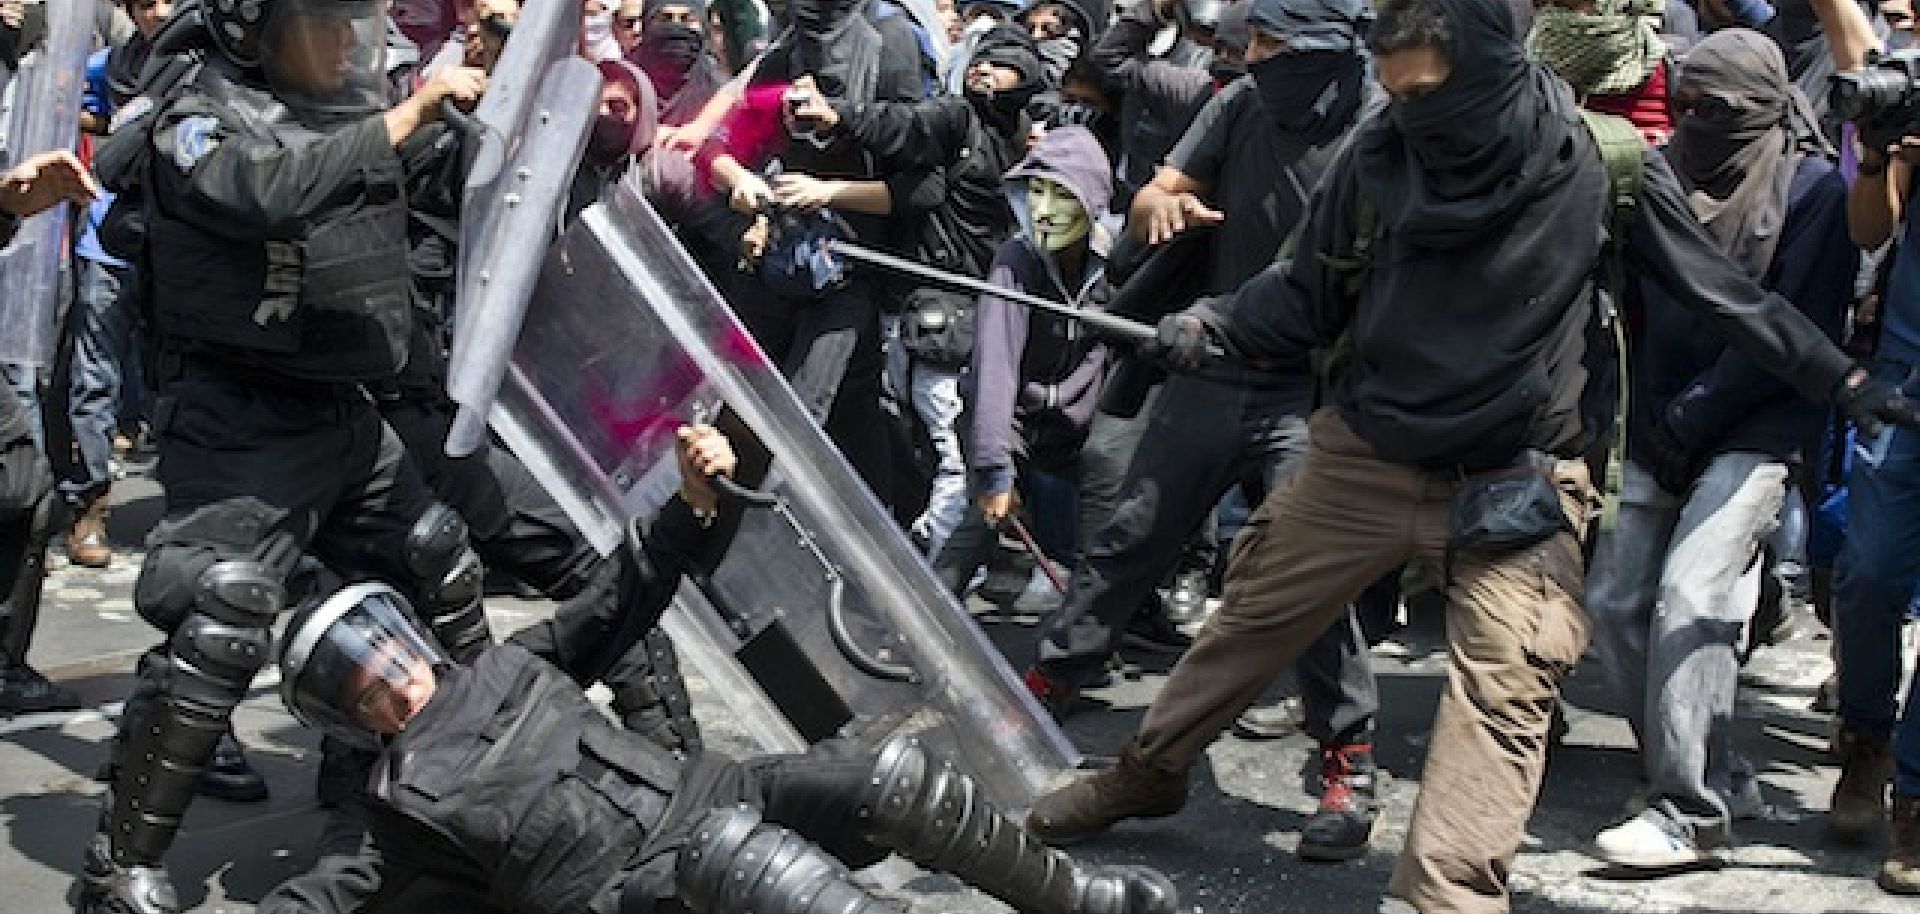 The National Context of Mexico City's Teacher Protests